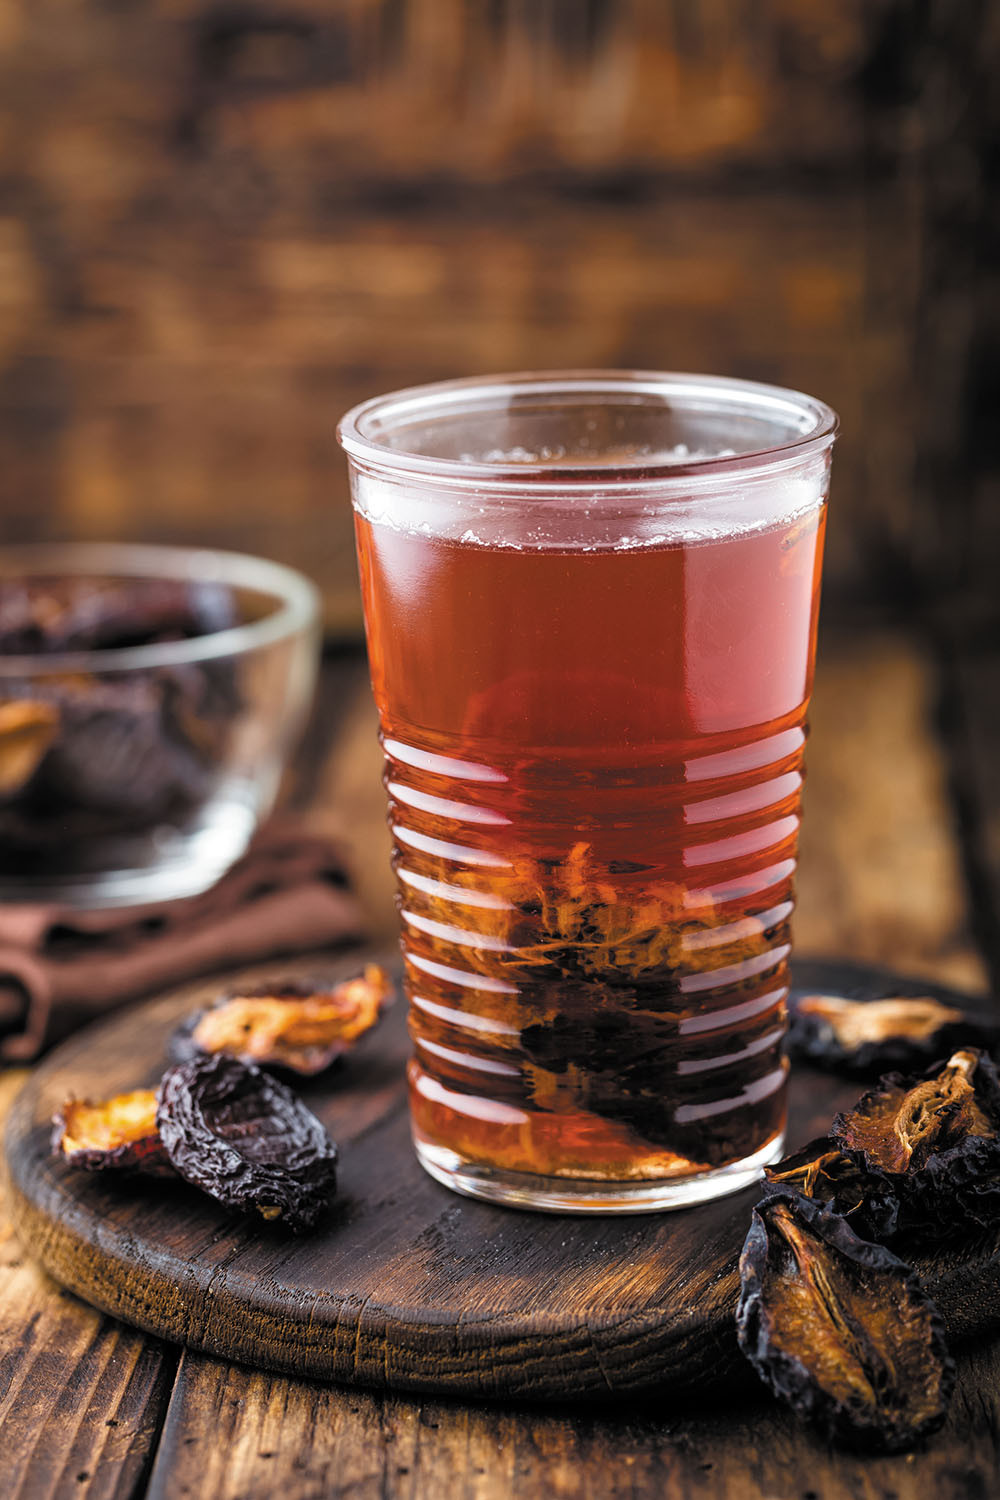 photo of a glass of prune juice on a wooden table